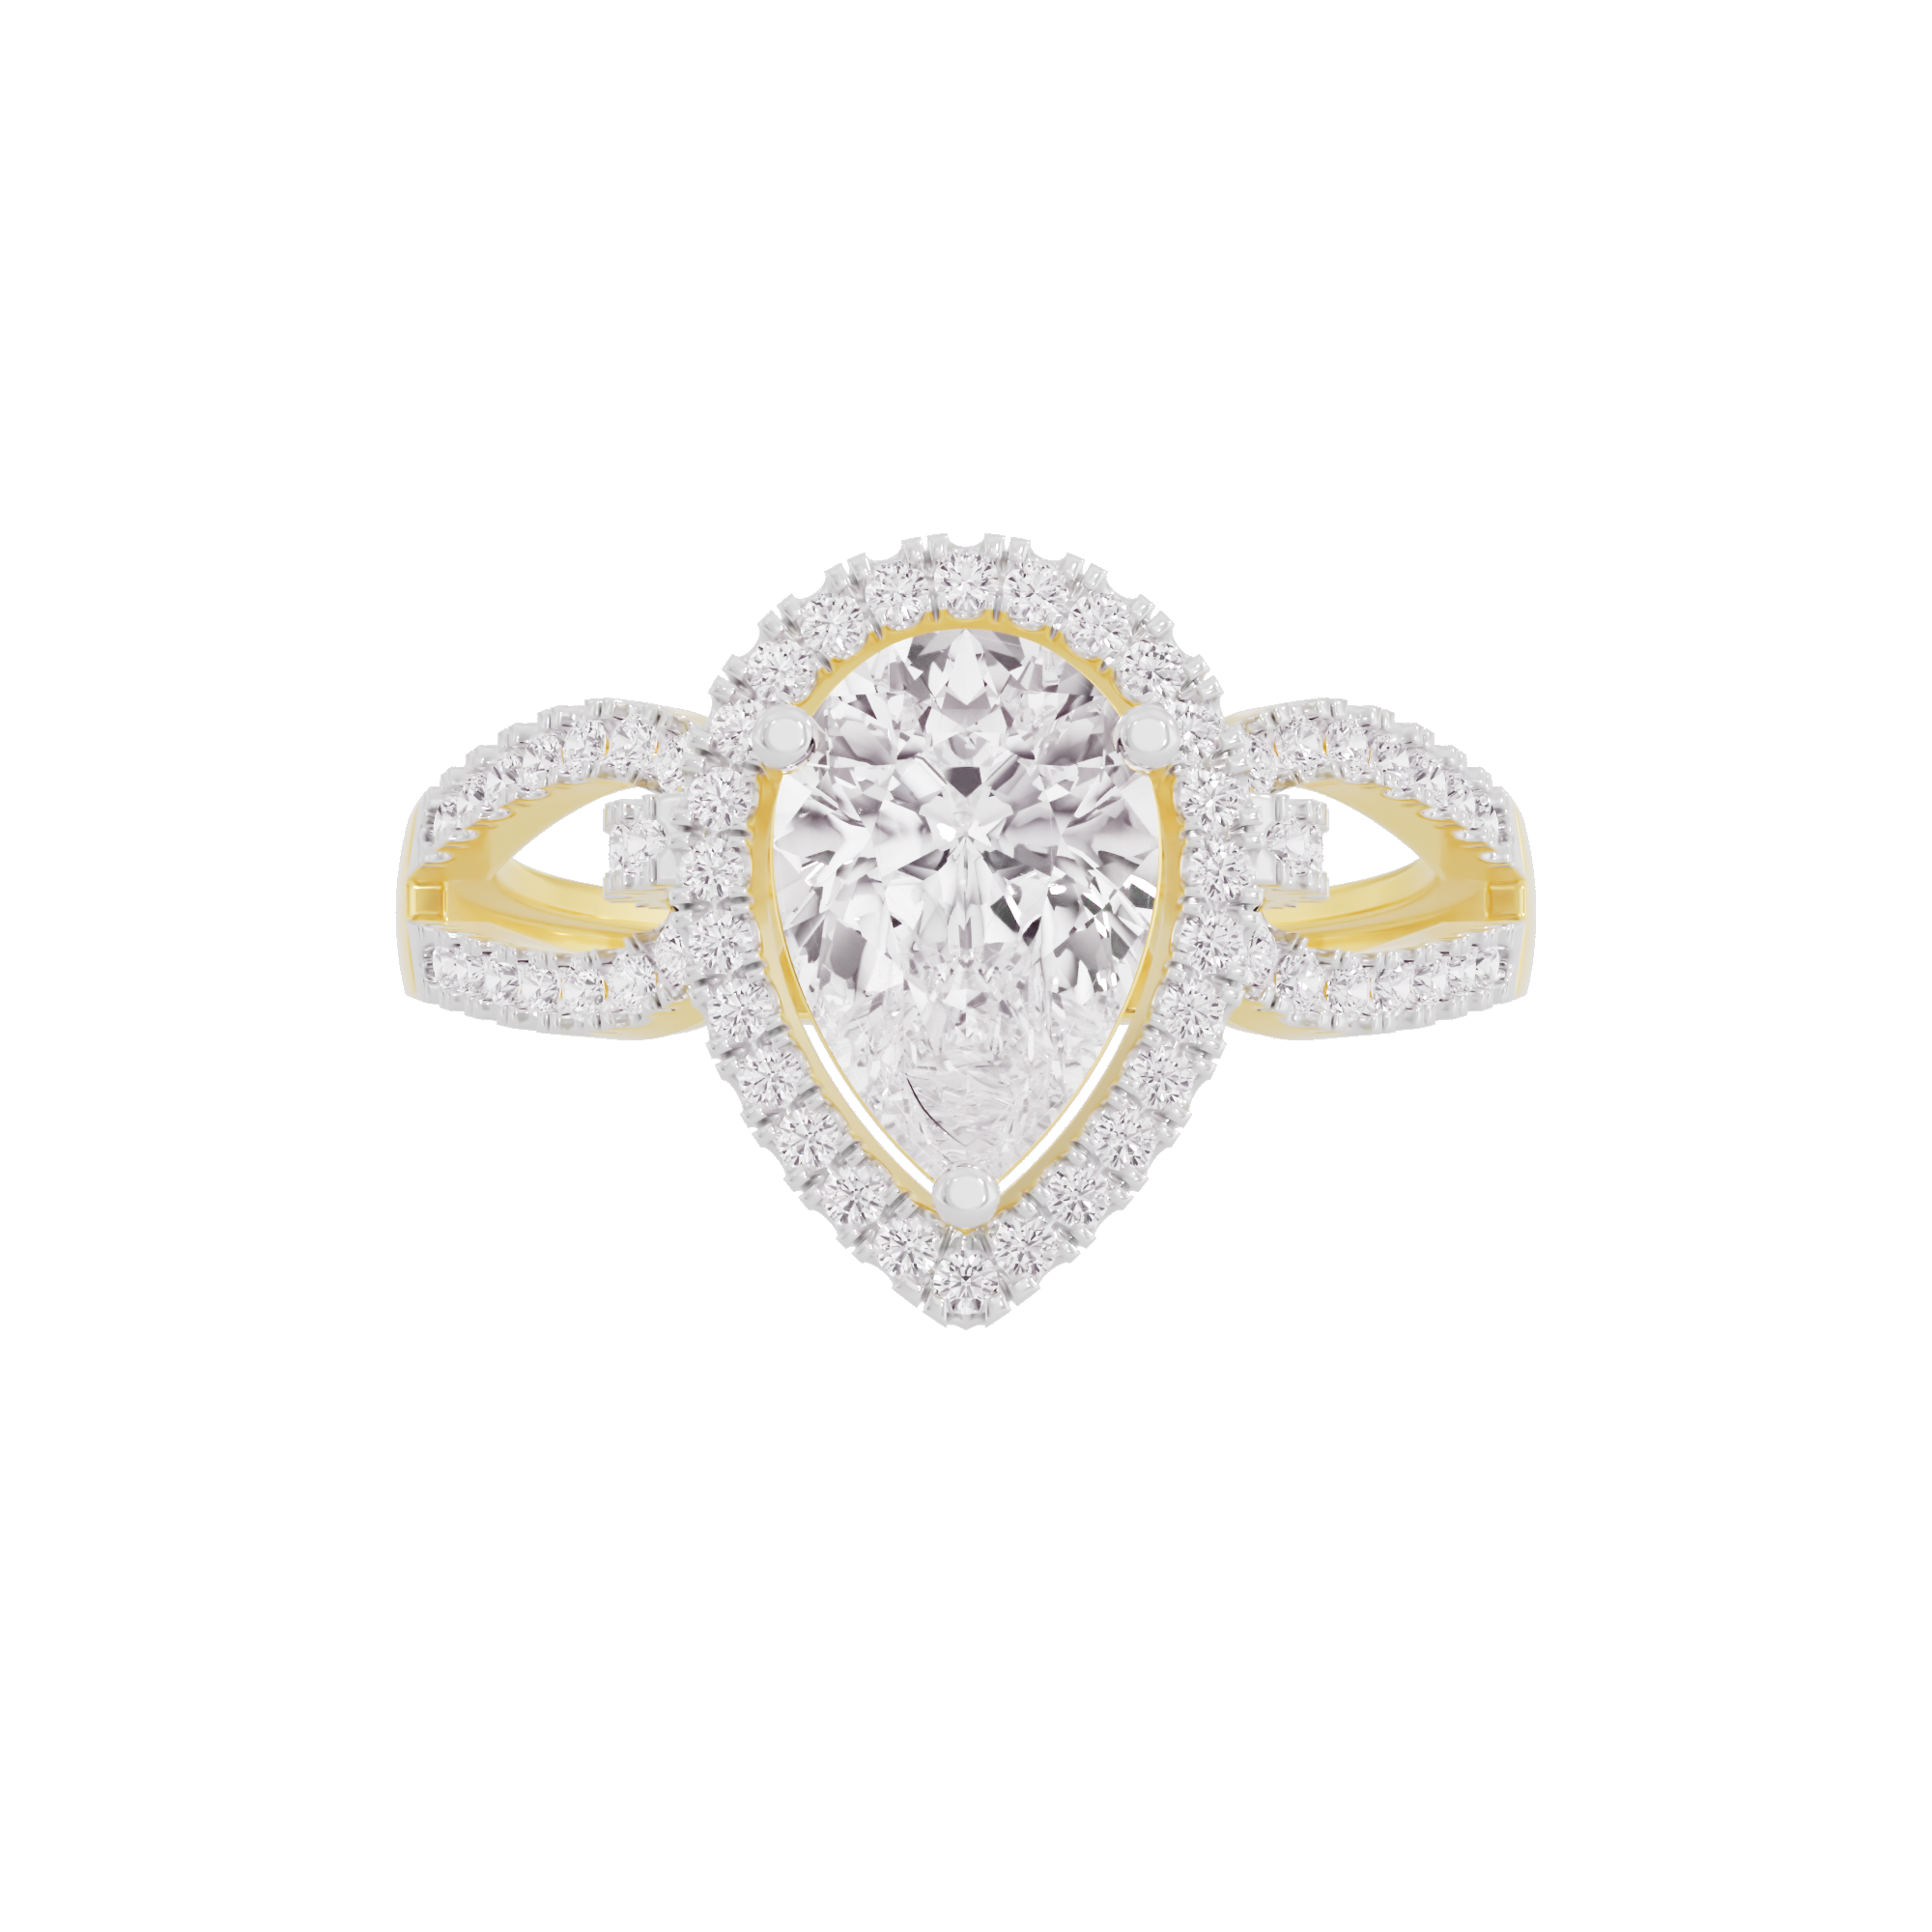 Exquisite Melody Diamond Ring